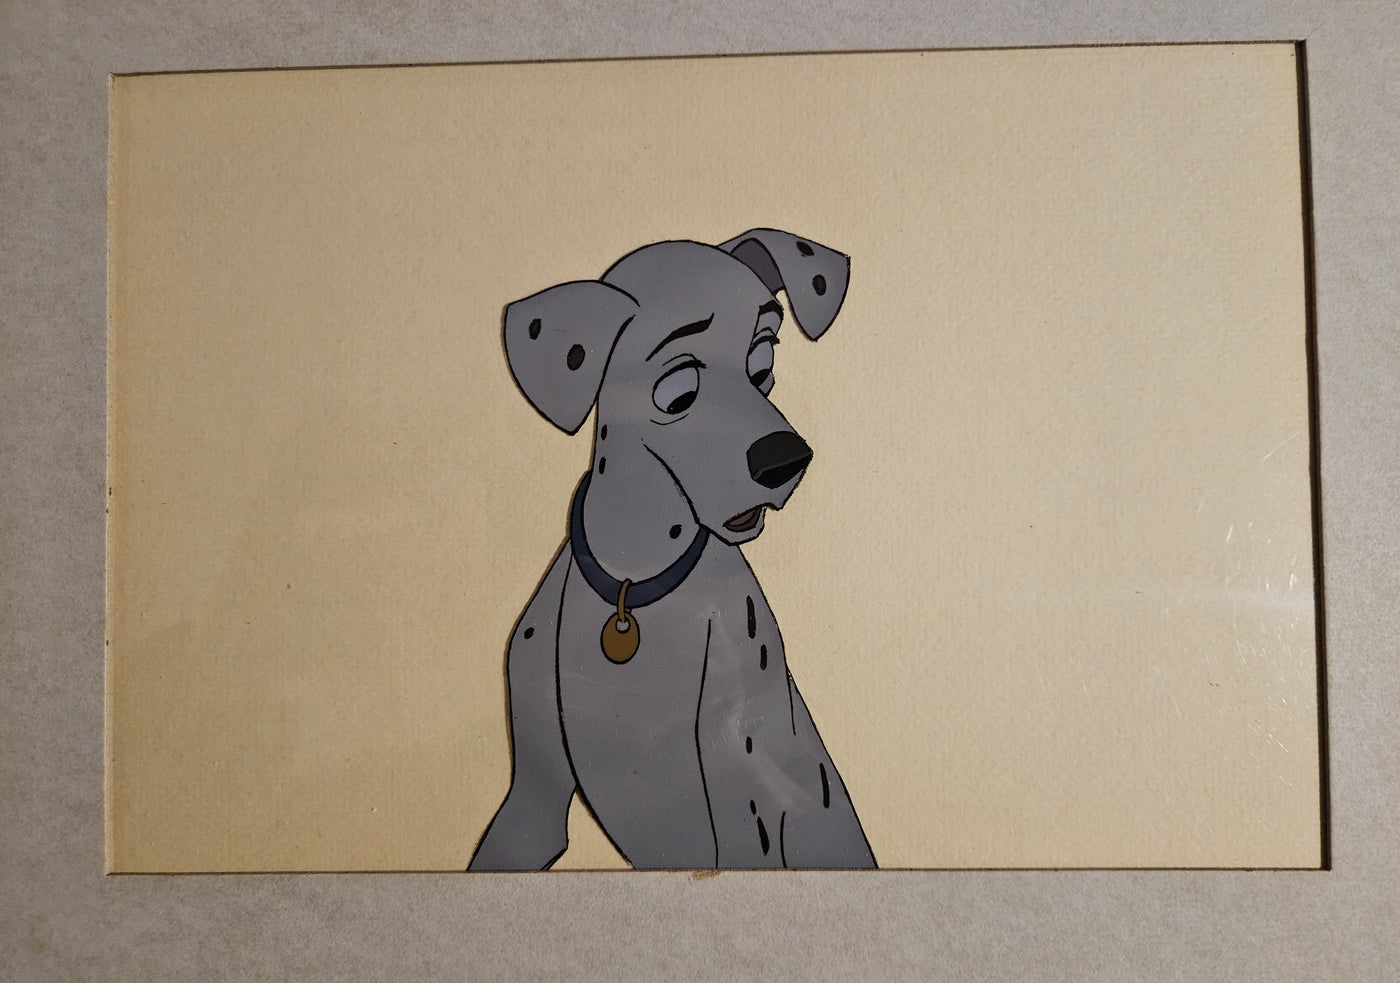 Original Walt Disney Production Cel from One Hundred and One Dalmatians featuring Perdita